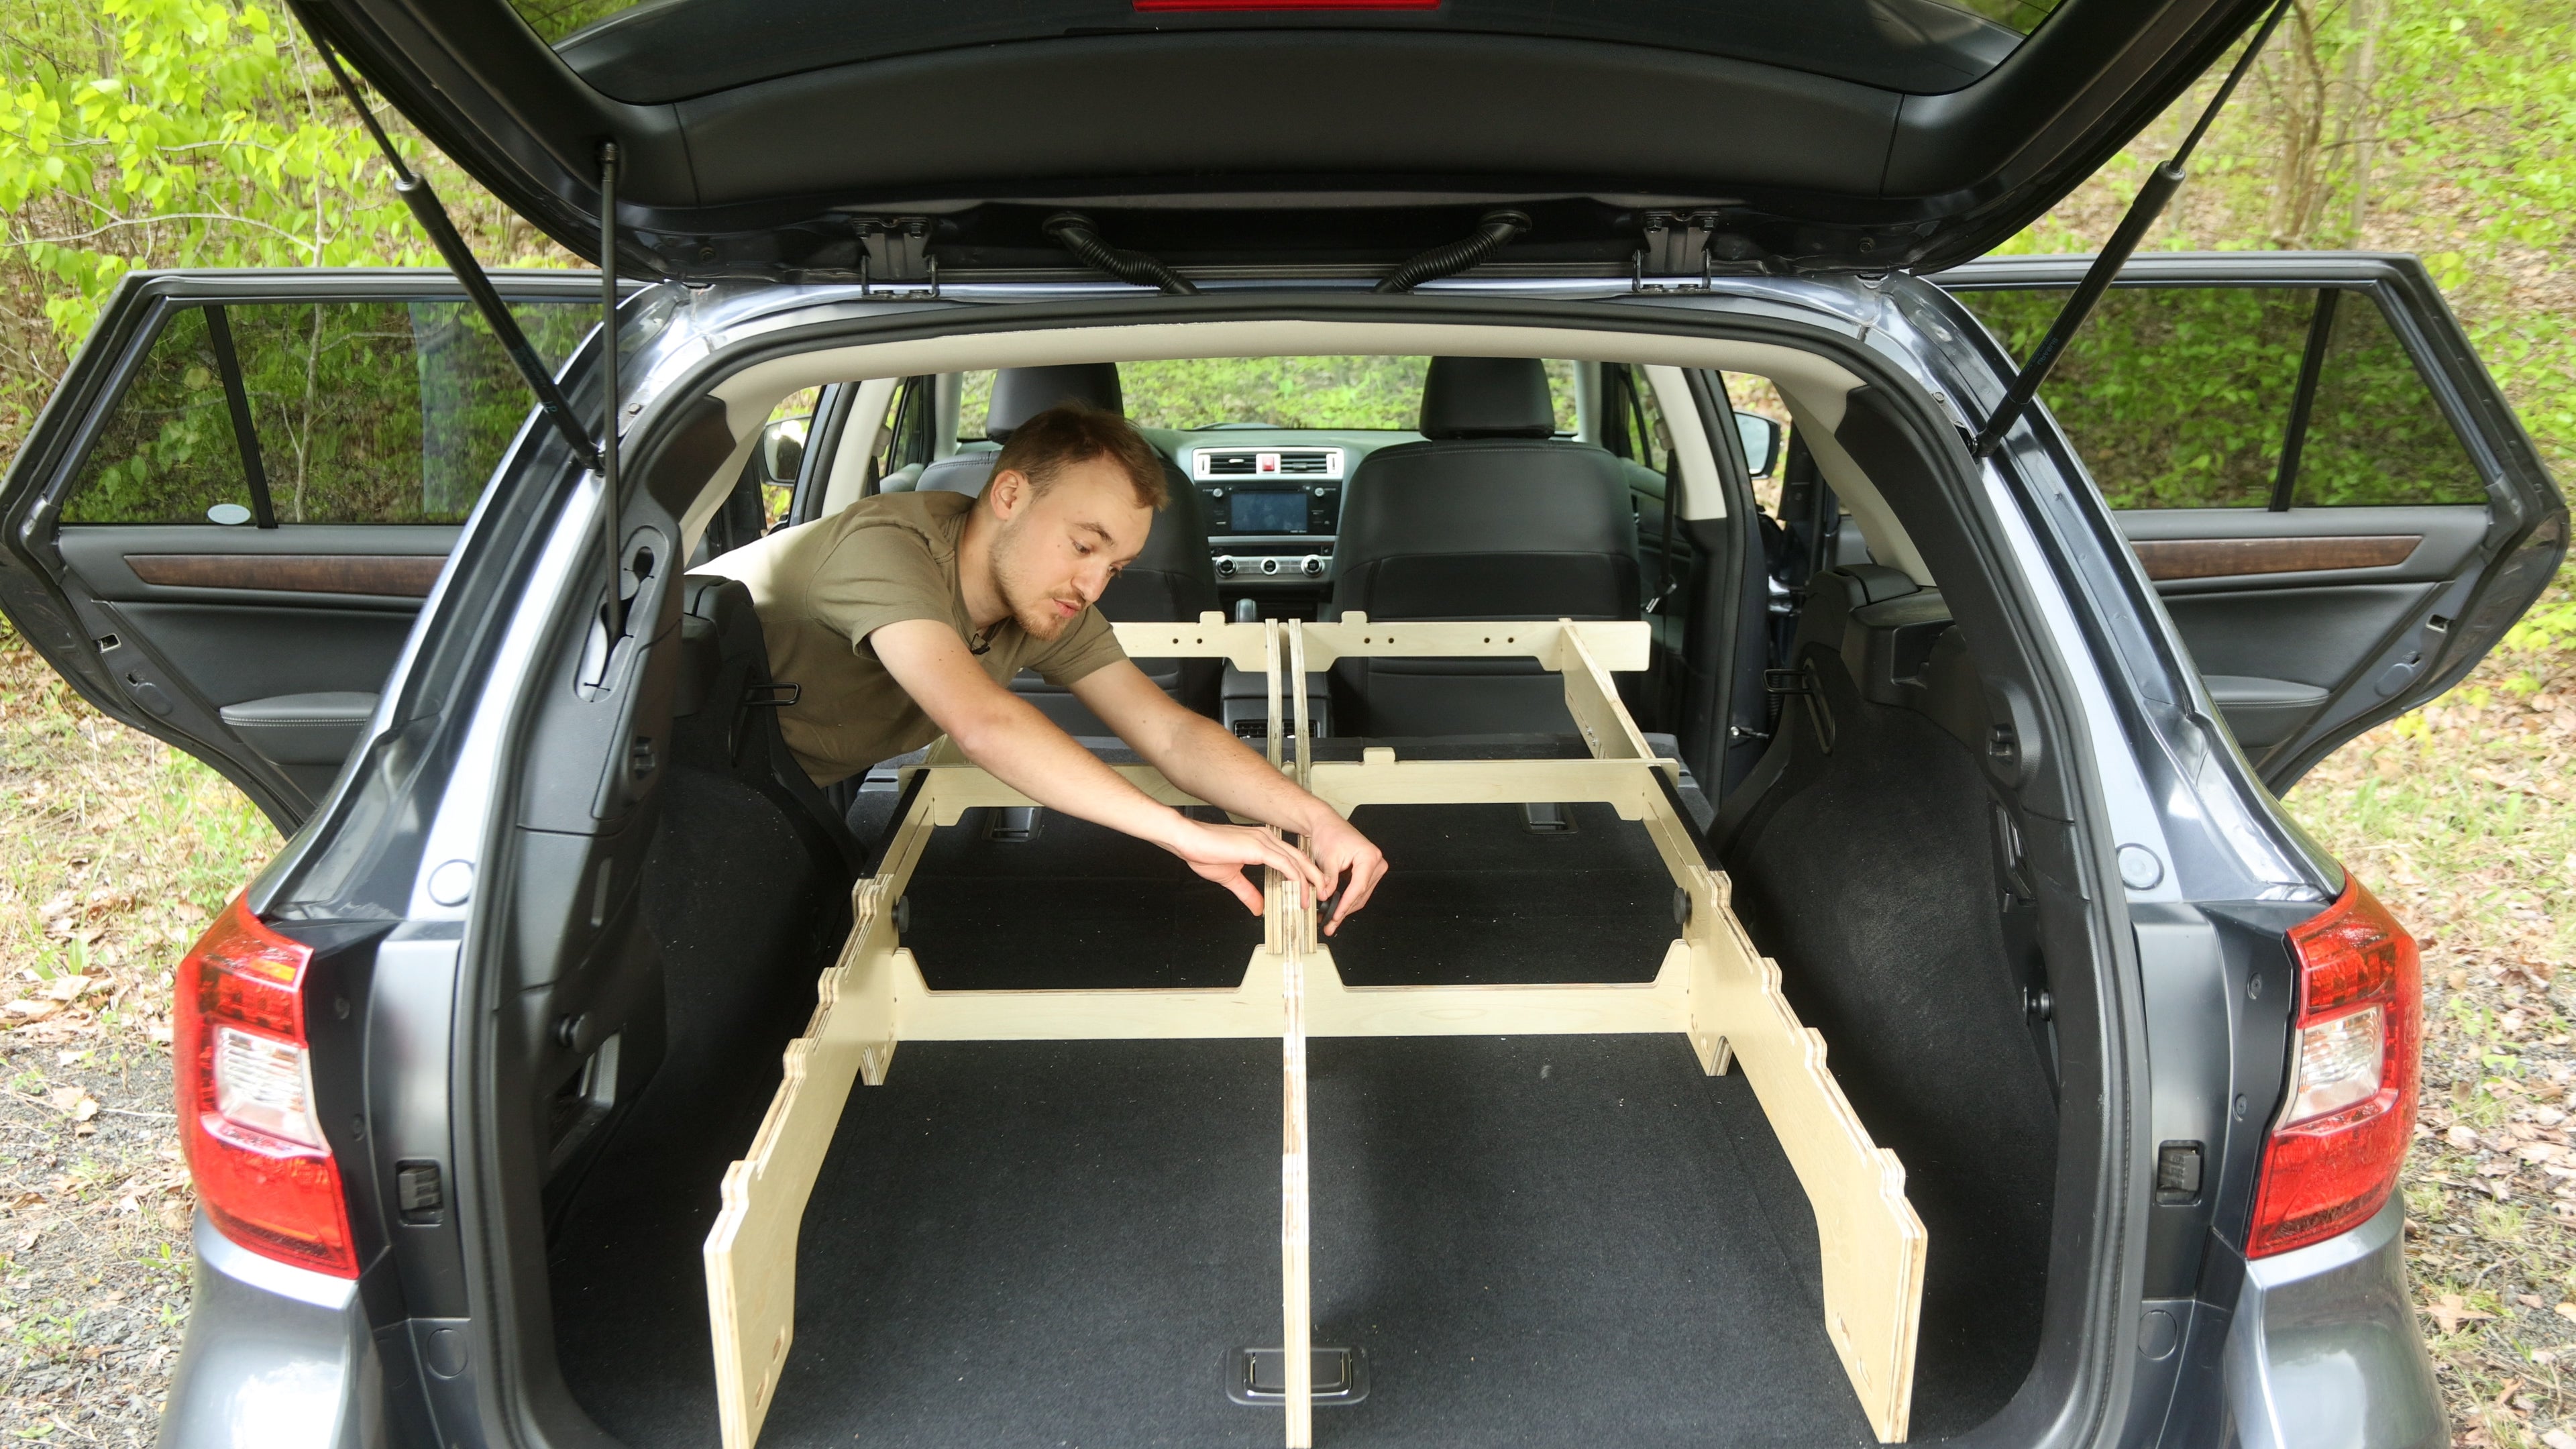 Load video: This install guide will show how to install the car camping Sleeping Platform in a Subaru Outback.